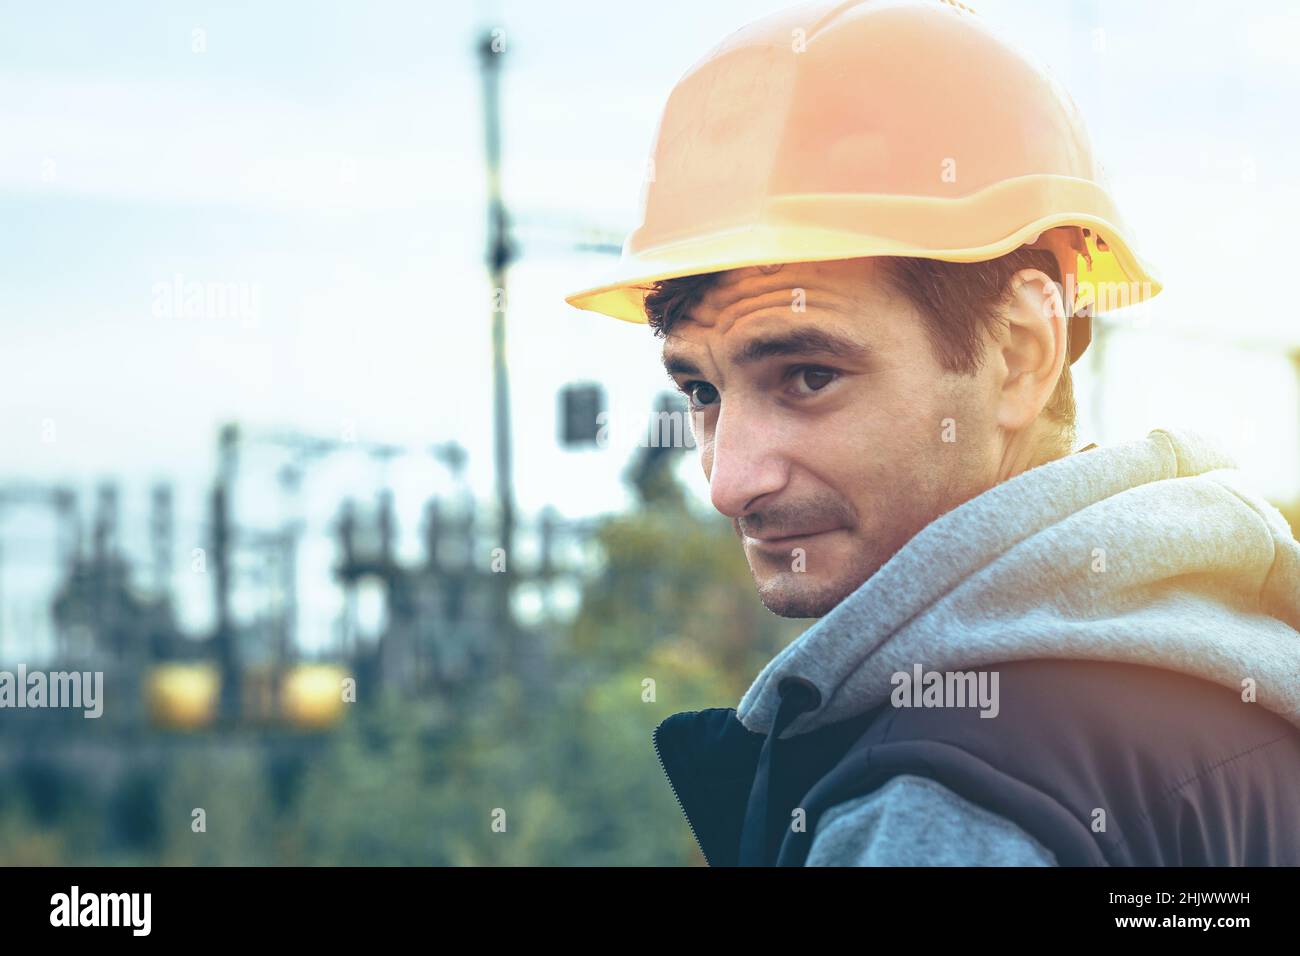 Worker in a helmet against the background of a substation and high-voltage poles Stock Photo